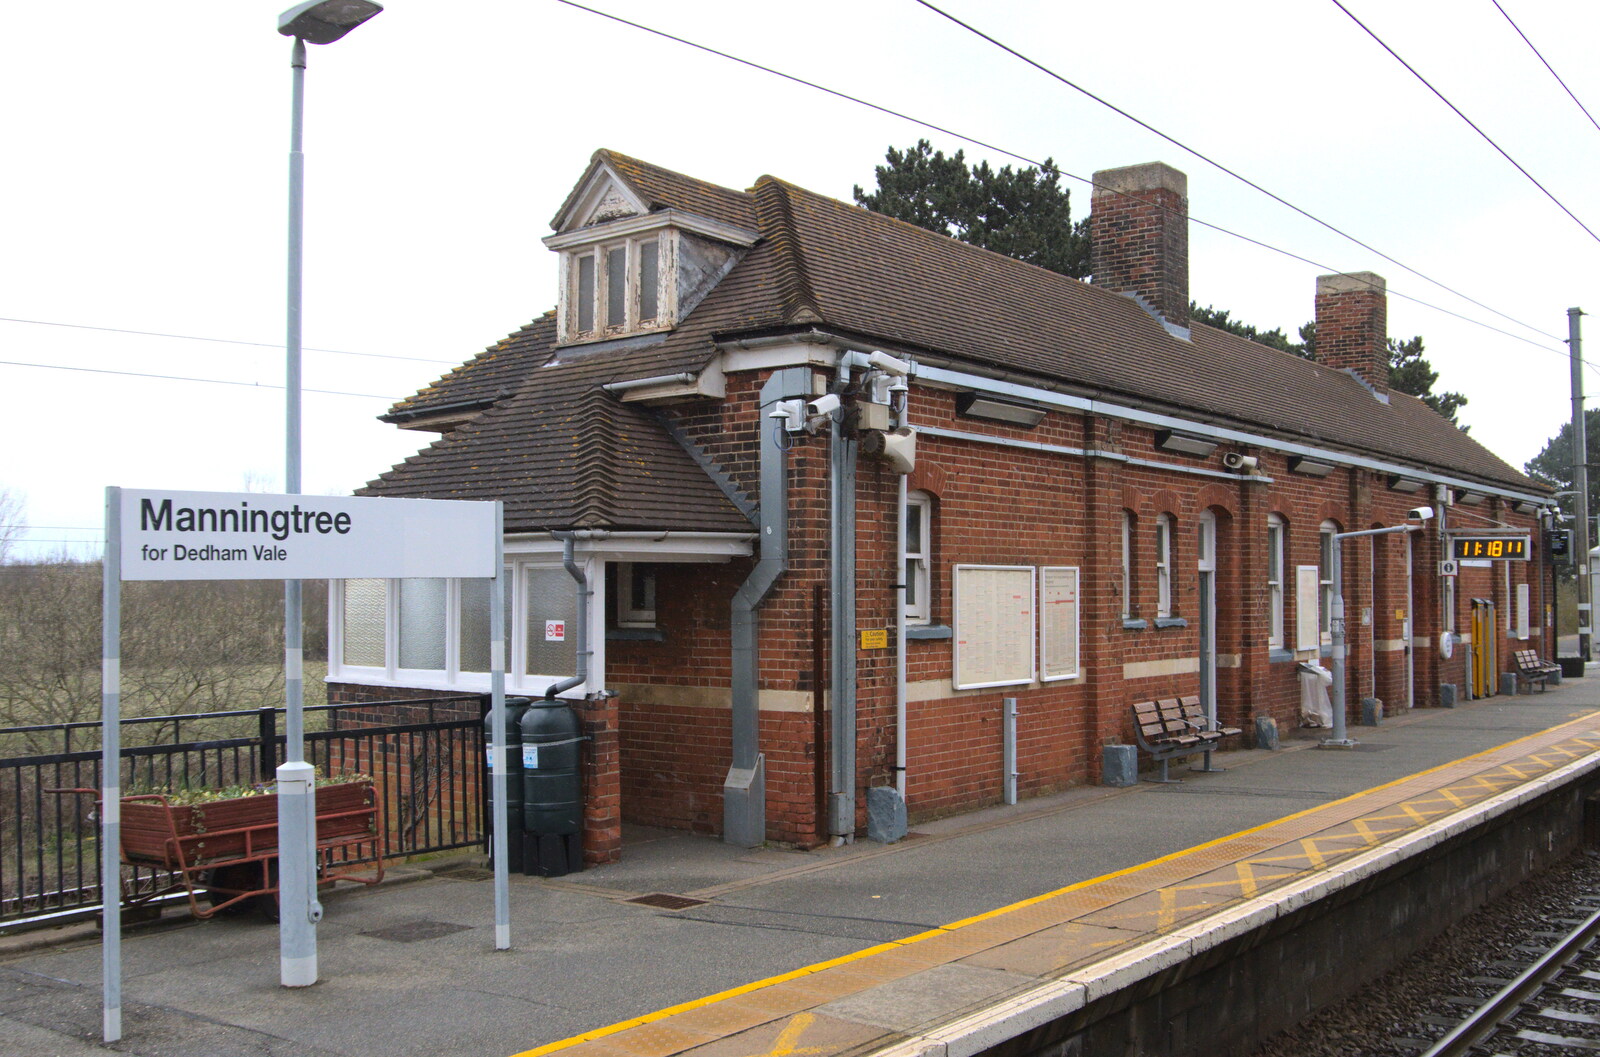 The station at Manningtree from A SwiftKey Memorial Service, Covent Garden, London  - 13th March 2020